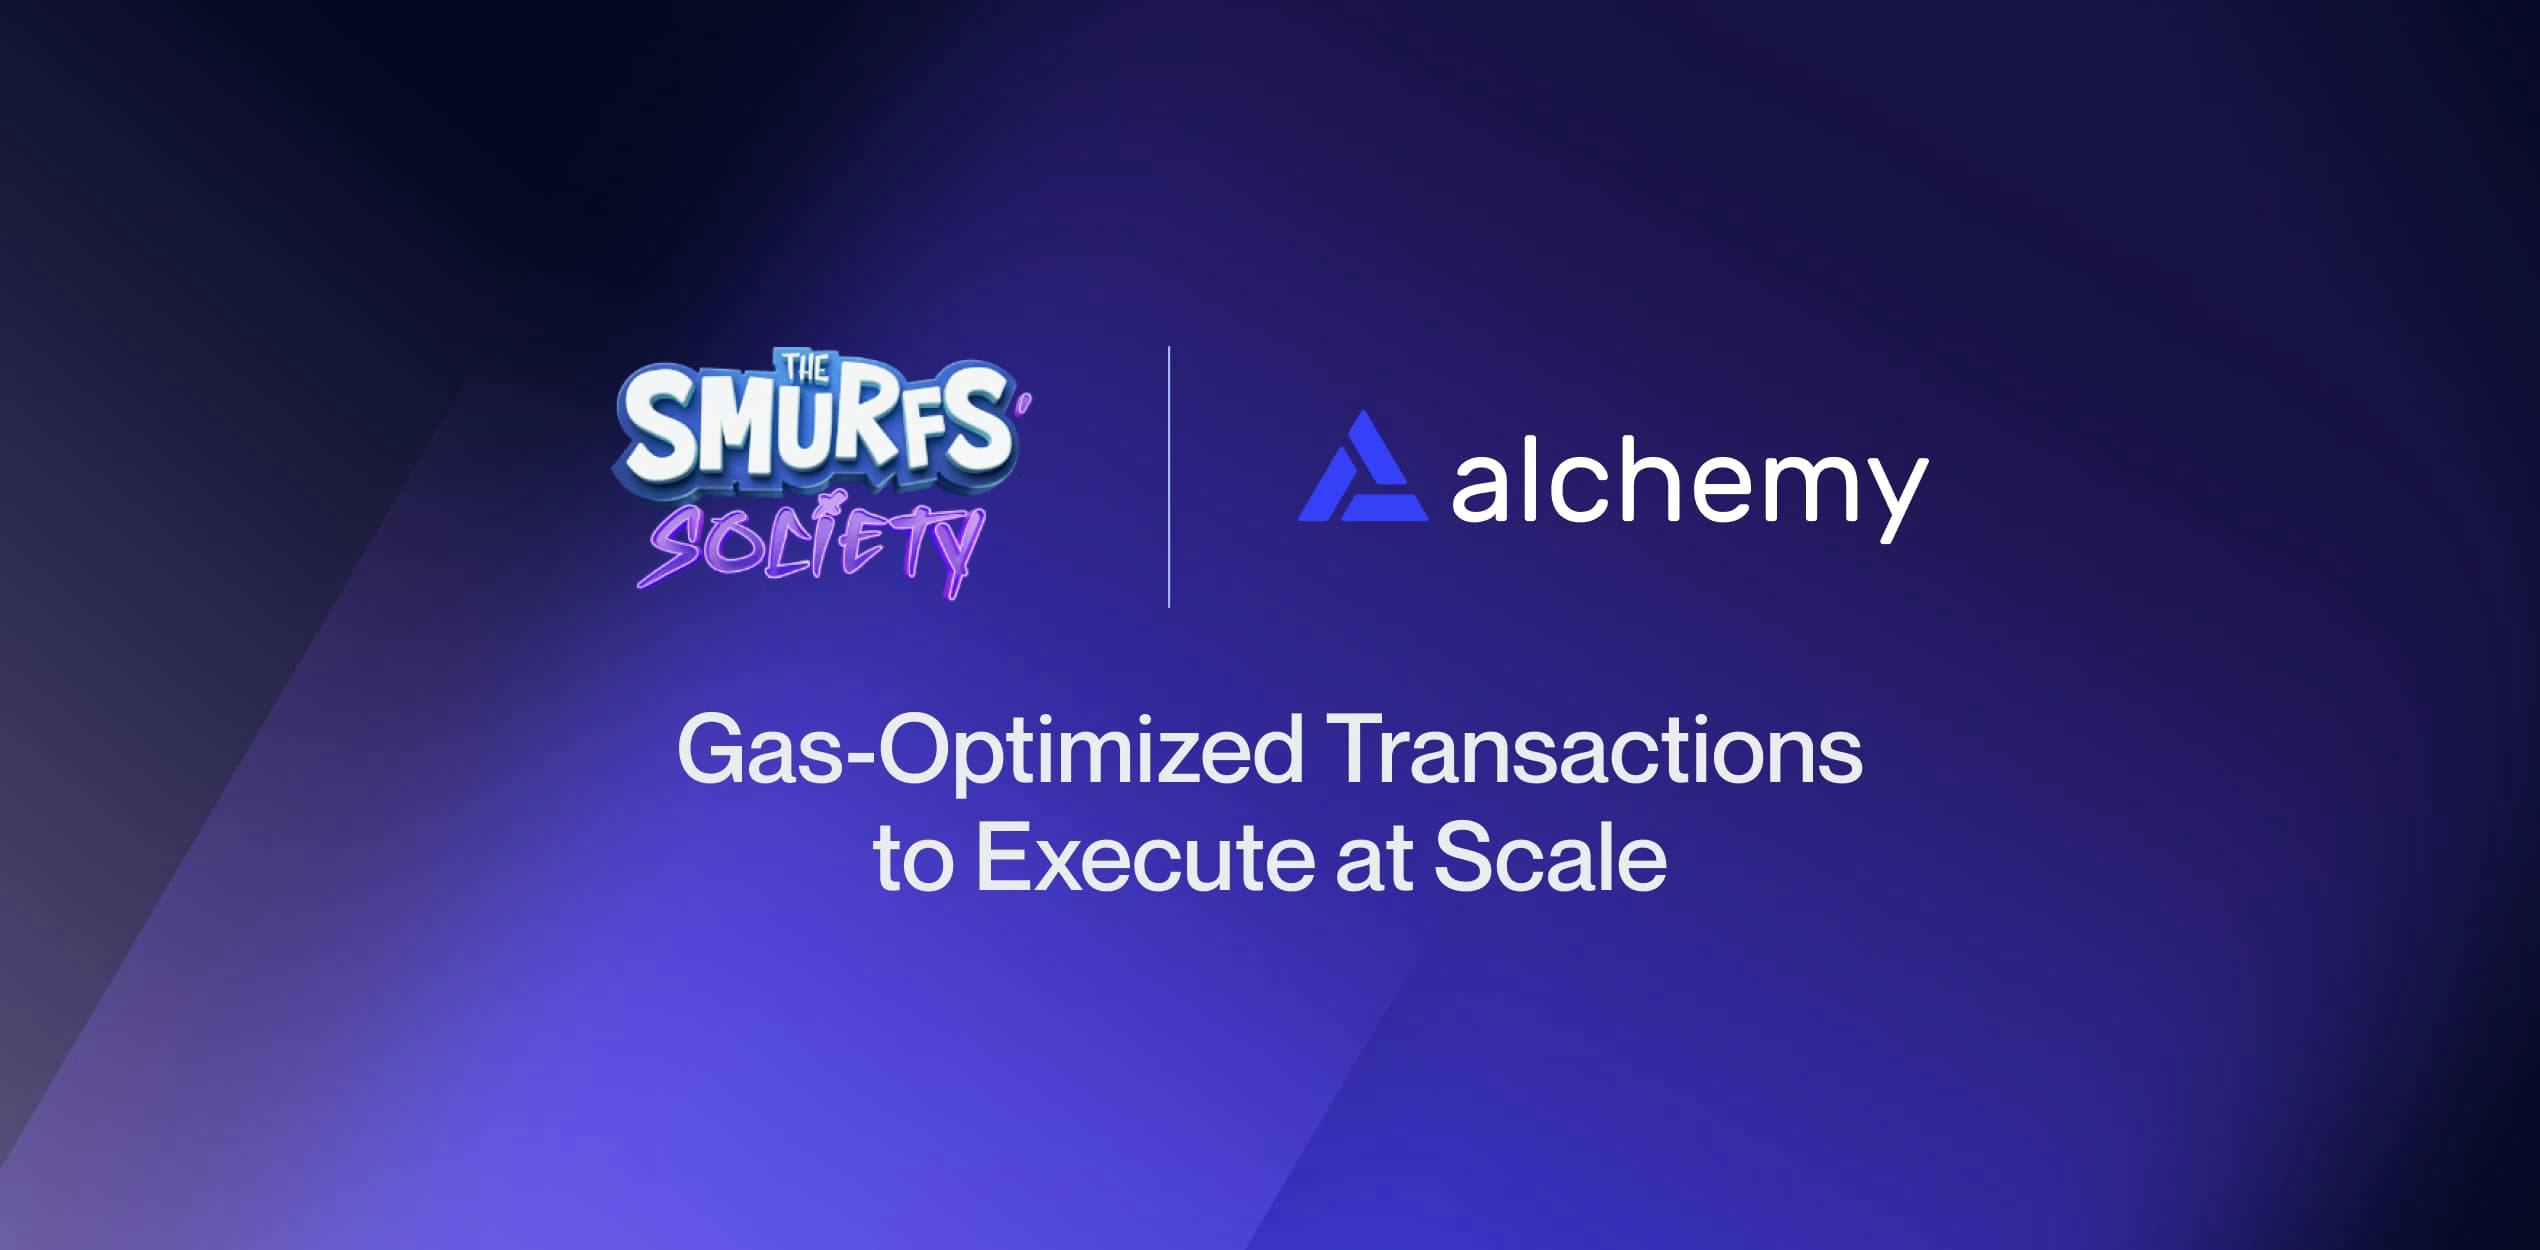 Scaling The Smurfs' Society with Gas Optimized Transactions thumbnail